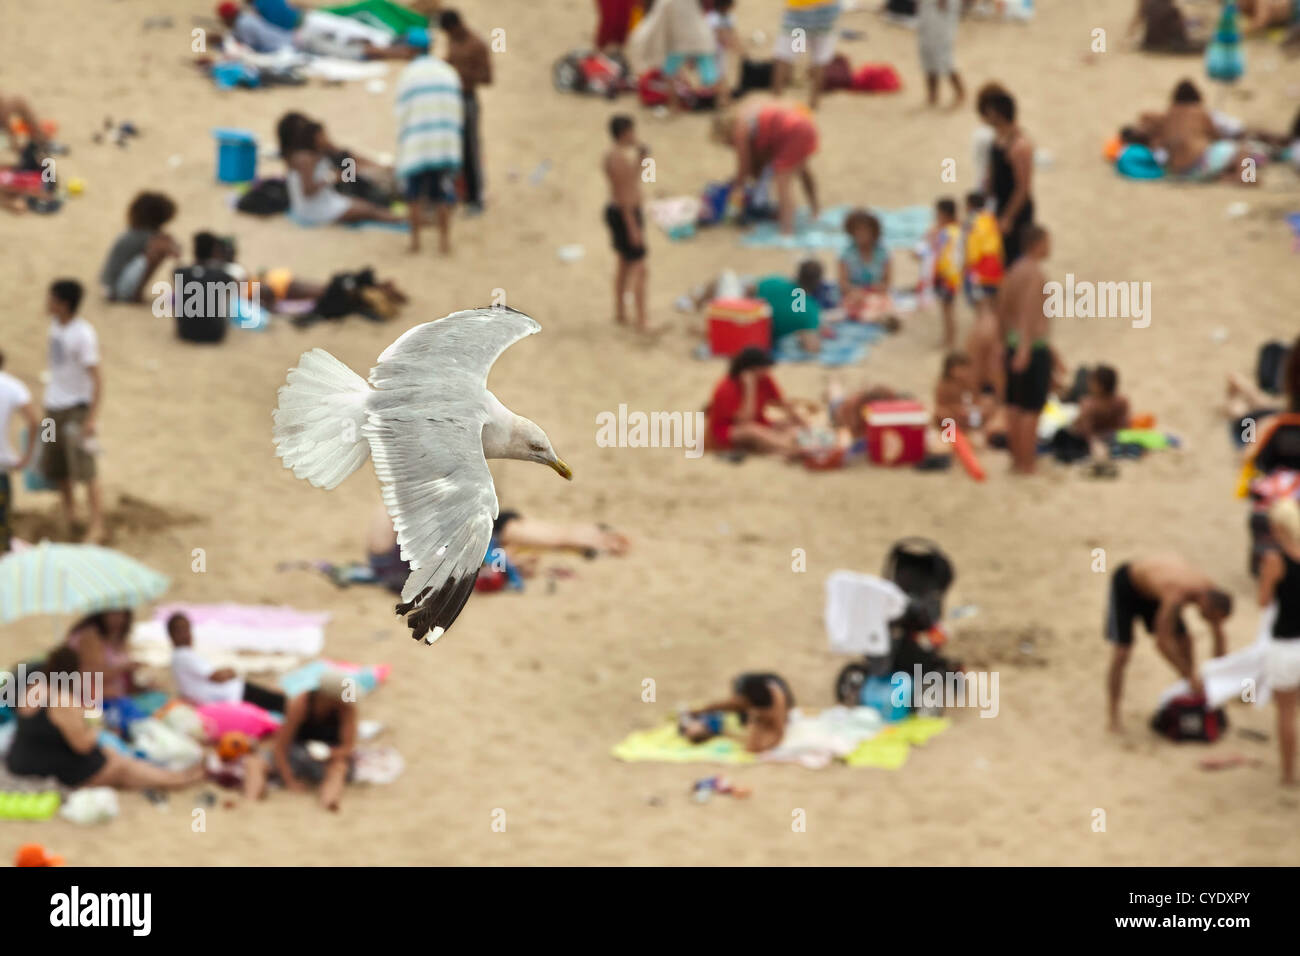 The Netherlands, Scheveningen, near The Hague or in Dutch: Den Haag. Seagull flying over people sunbathing on the beach. Aerial Stock Photo